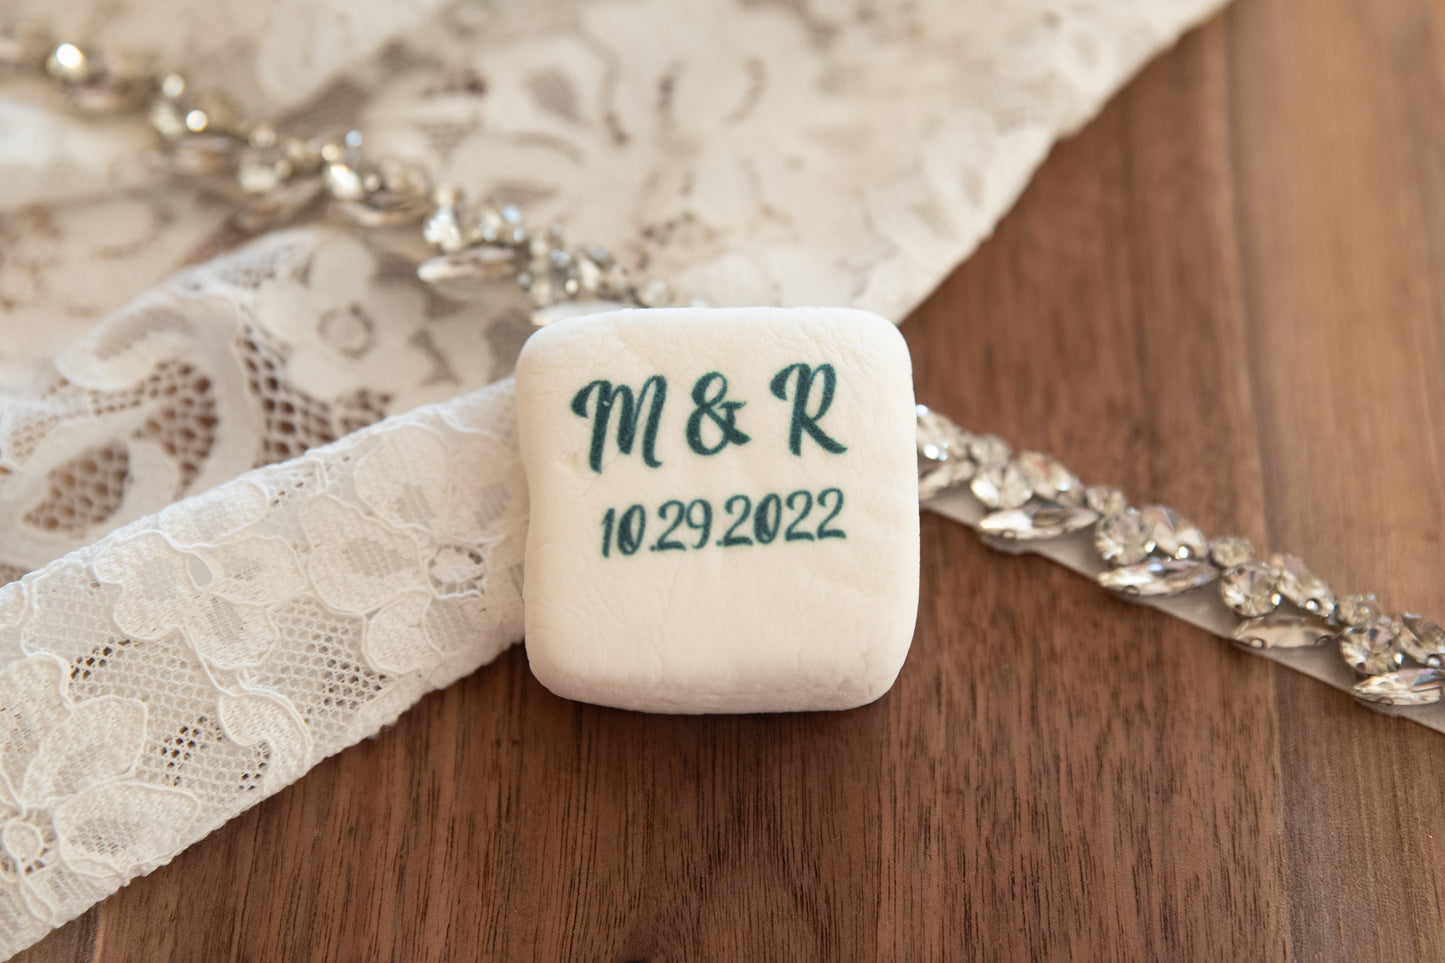 S'more Wedding Favors with Custom Text or Images - A Unique Treat for Guests